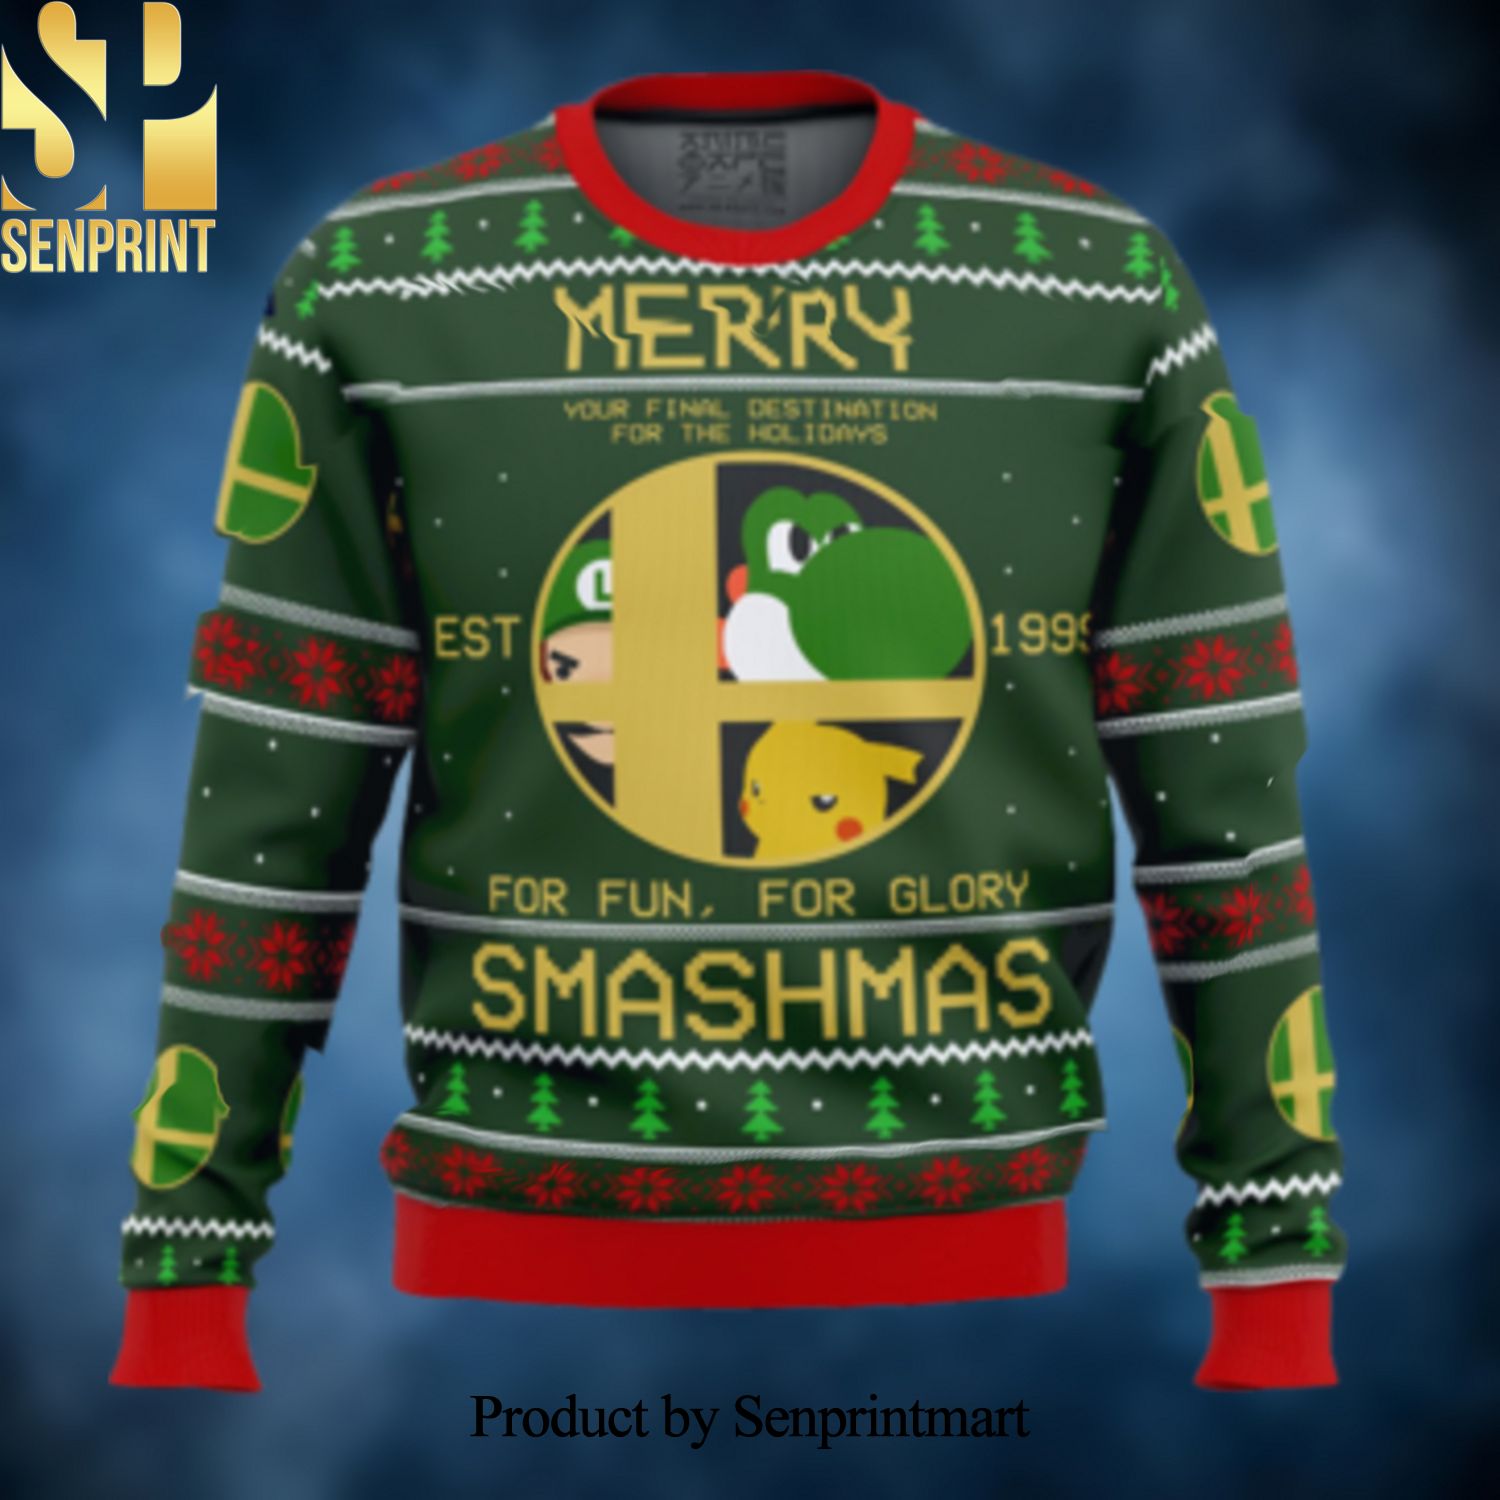 Super Smash Bros Merry Smashmas Christmas Wool Knitted 3D Sweater